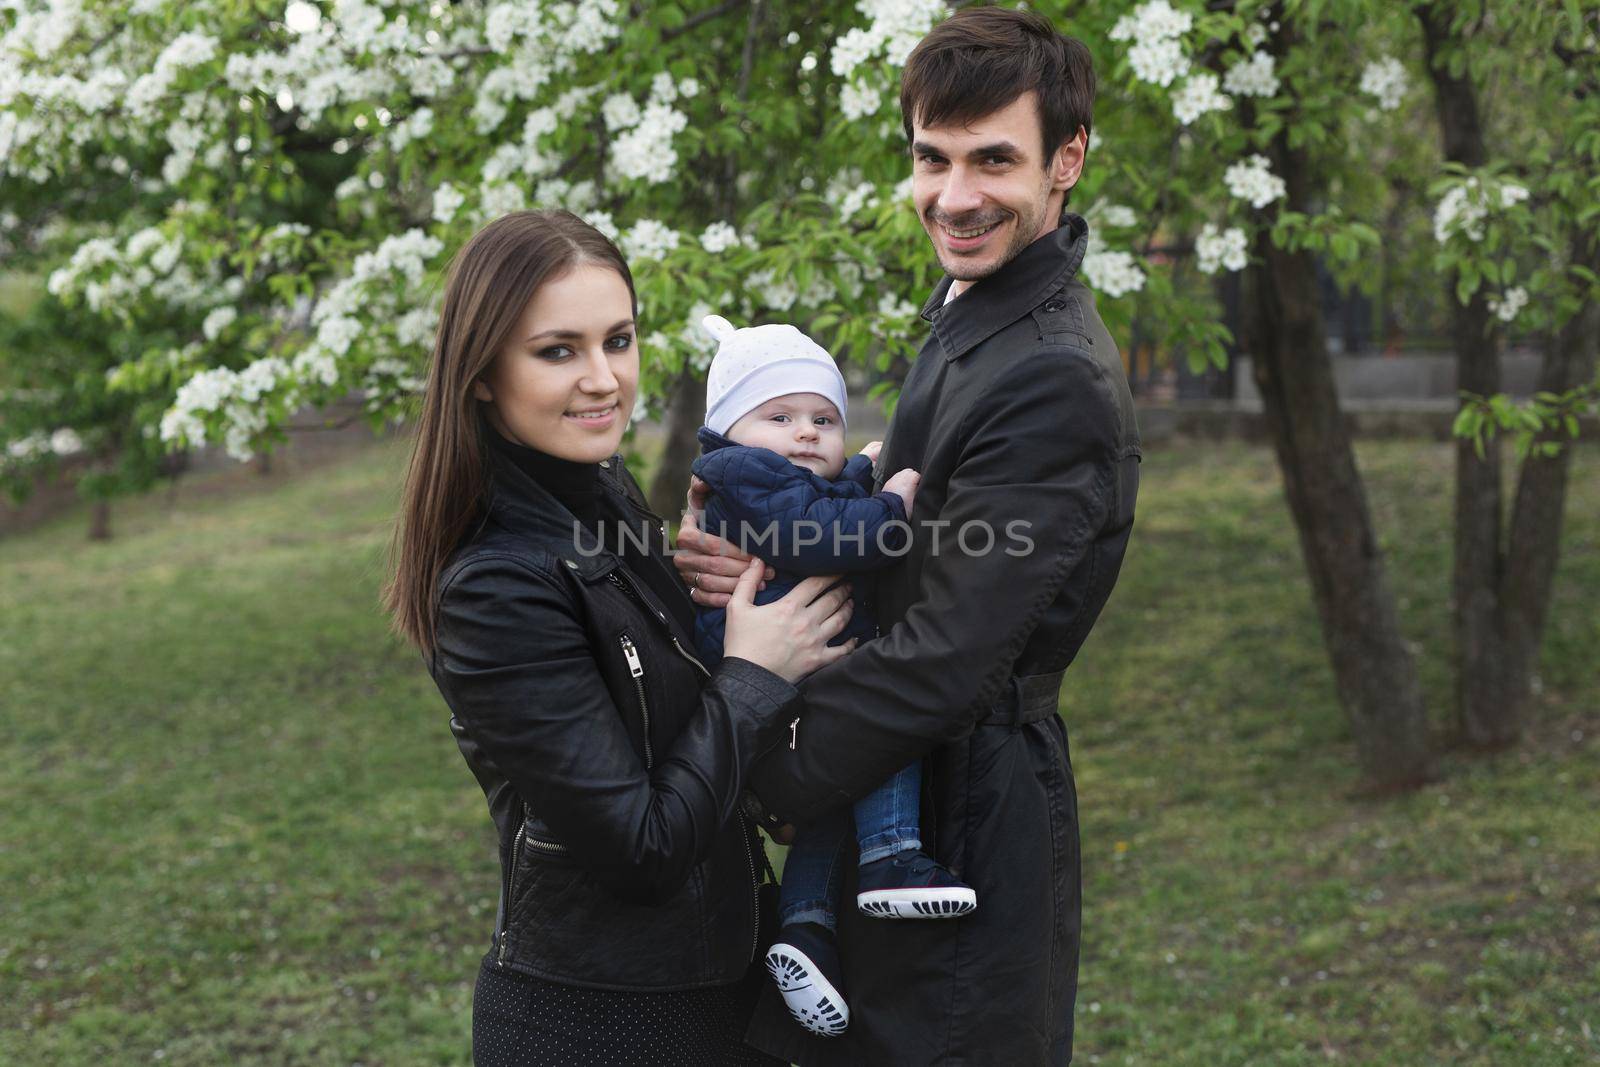 Beautiful smiling faces of people. A happy young family from three persons. by StudioPeace